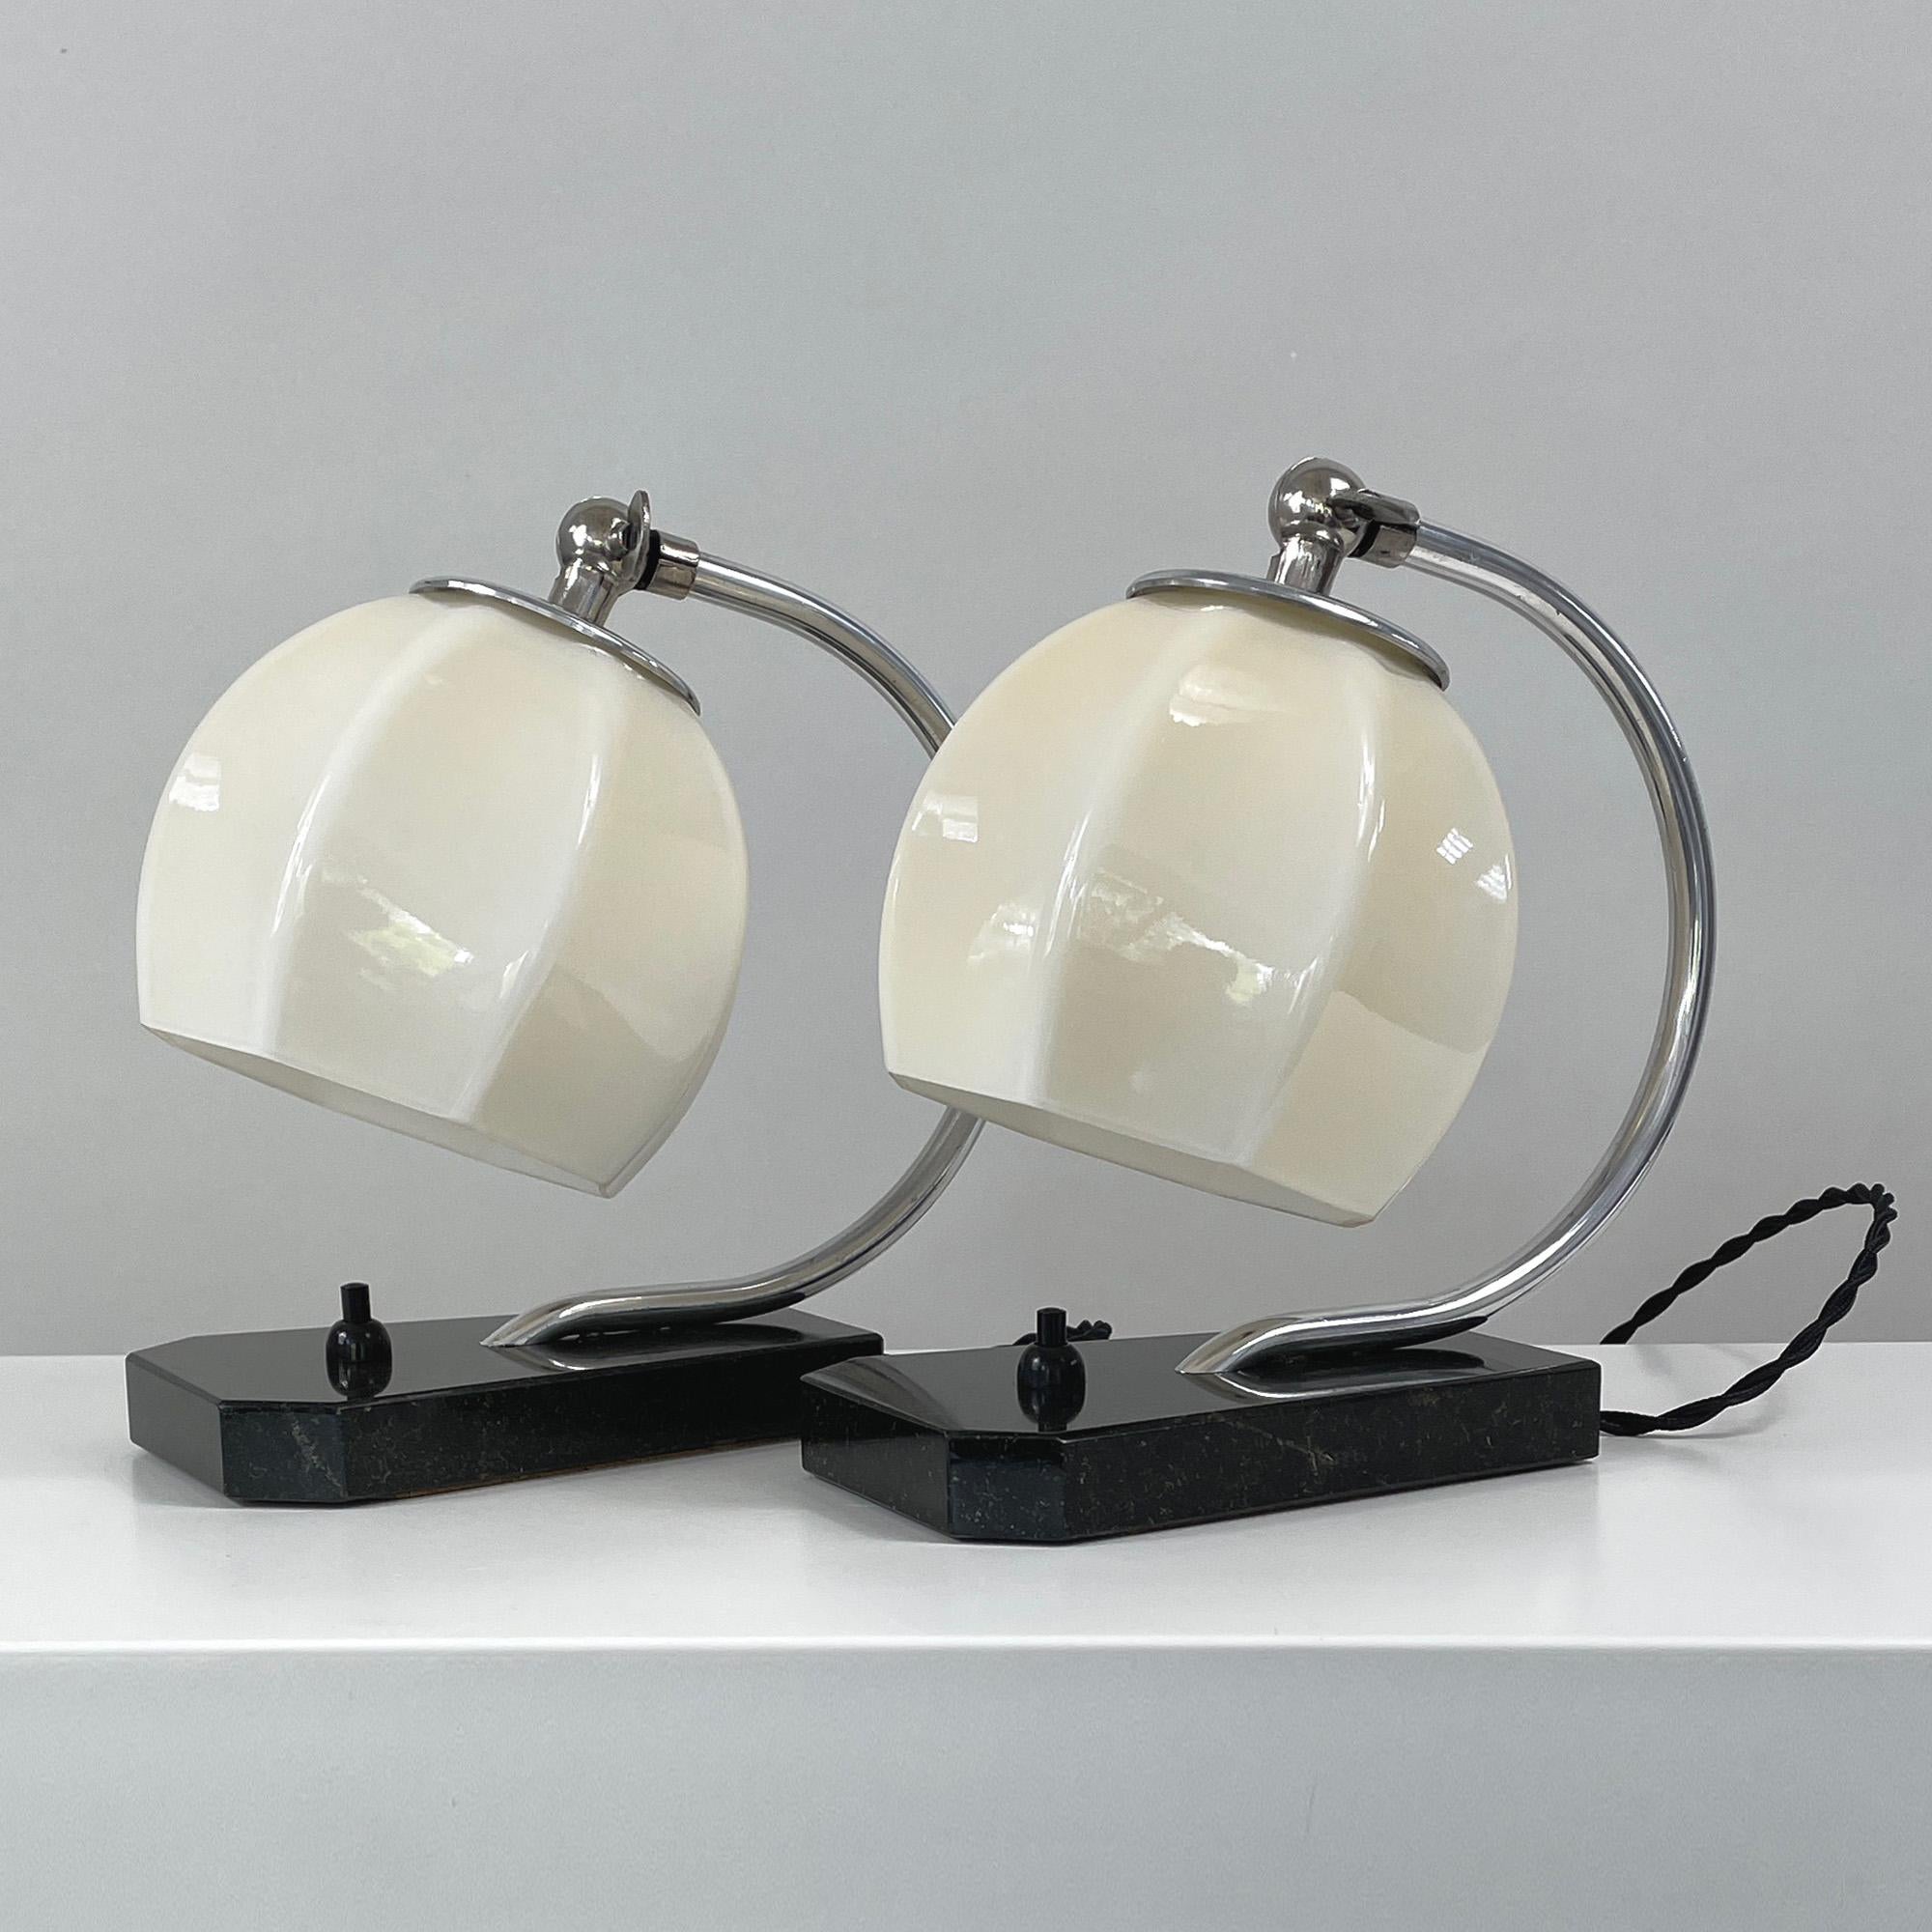 Mid-20th Century German Art Deco Opaline Glass, Marble and Aluminum Table Lamps, 1930s For Sale